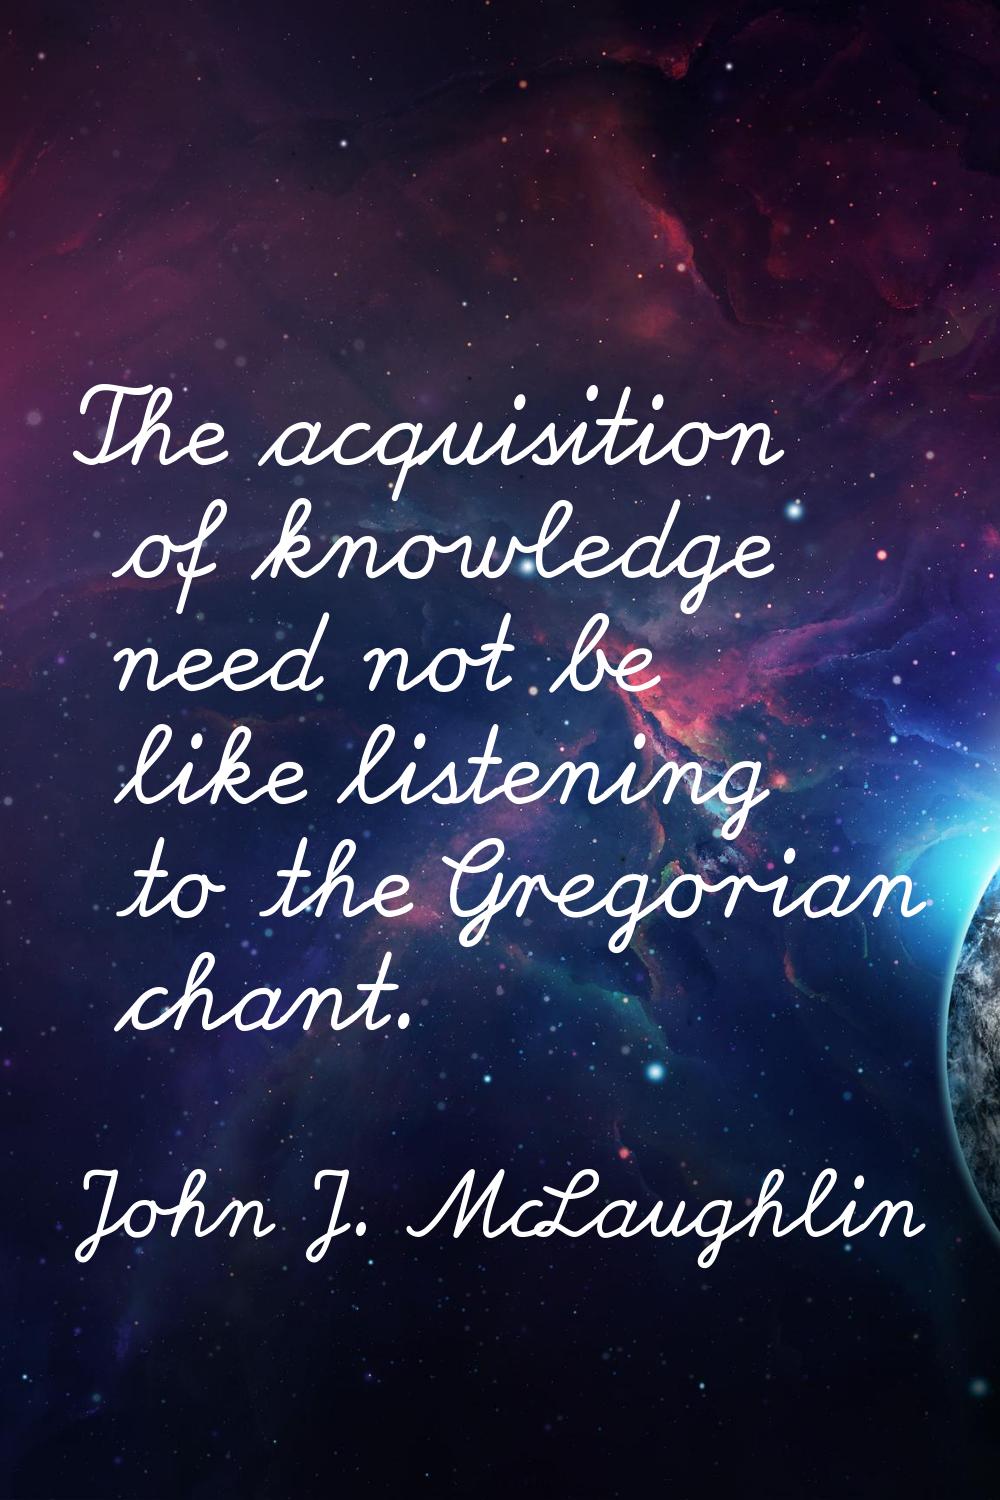 The acquisition of knowledge need not be like listening to the Gregorian chant.